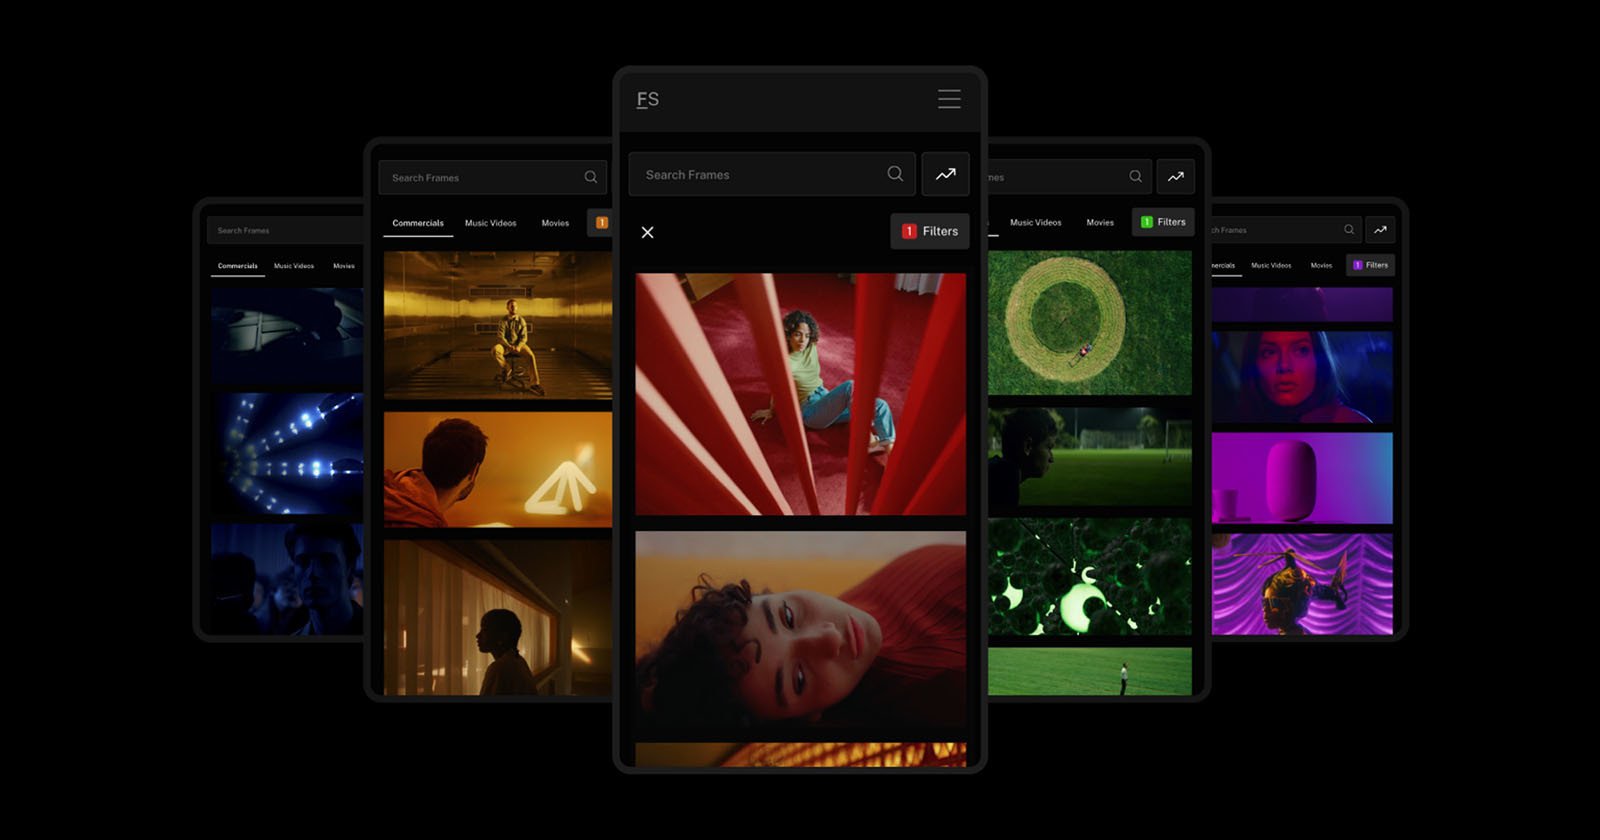 Frame Set Lets You Search a Library of Movie Scenes to Inspire New Projects